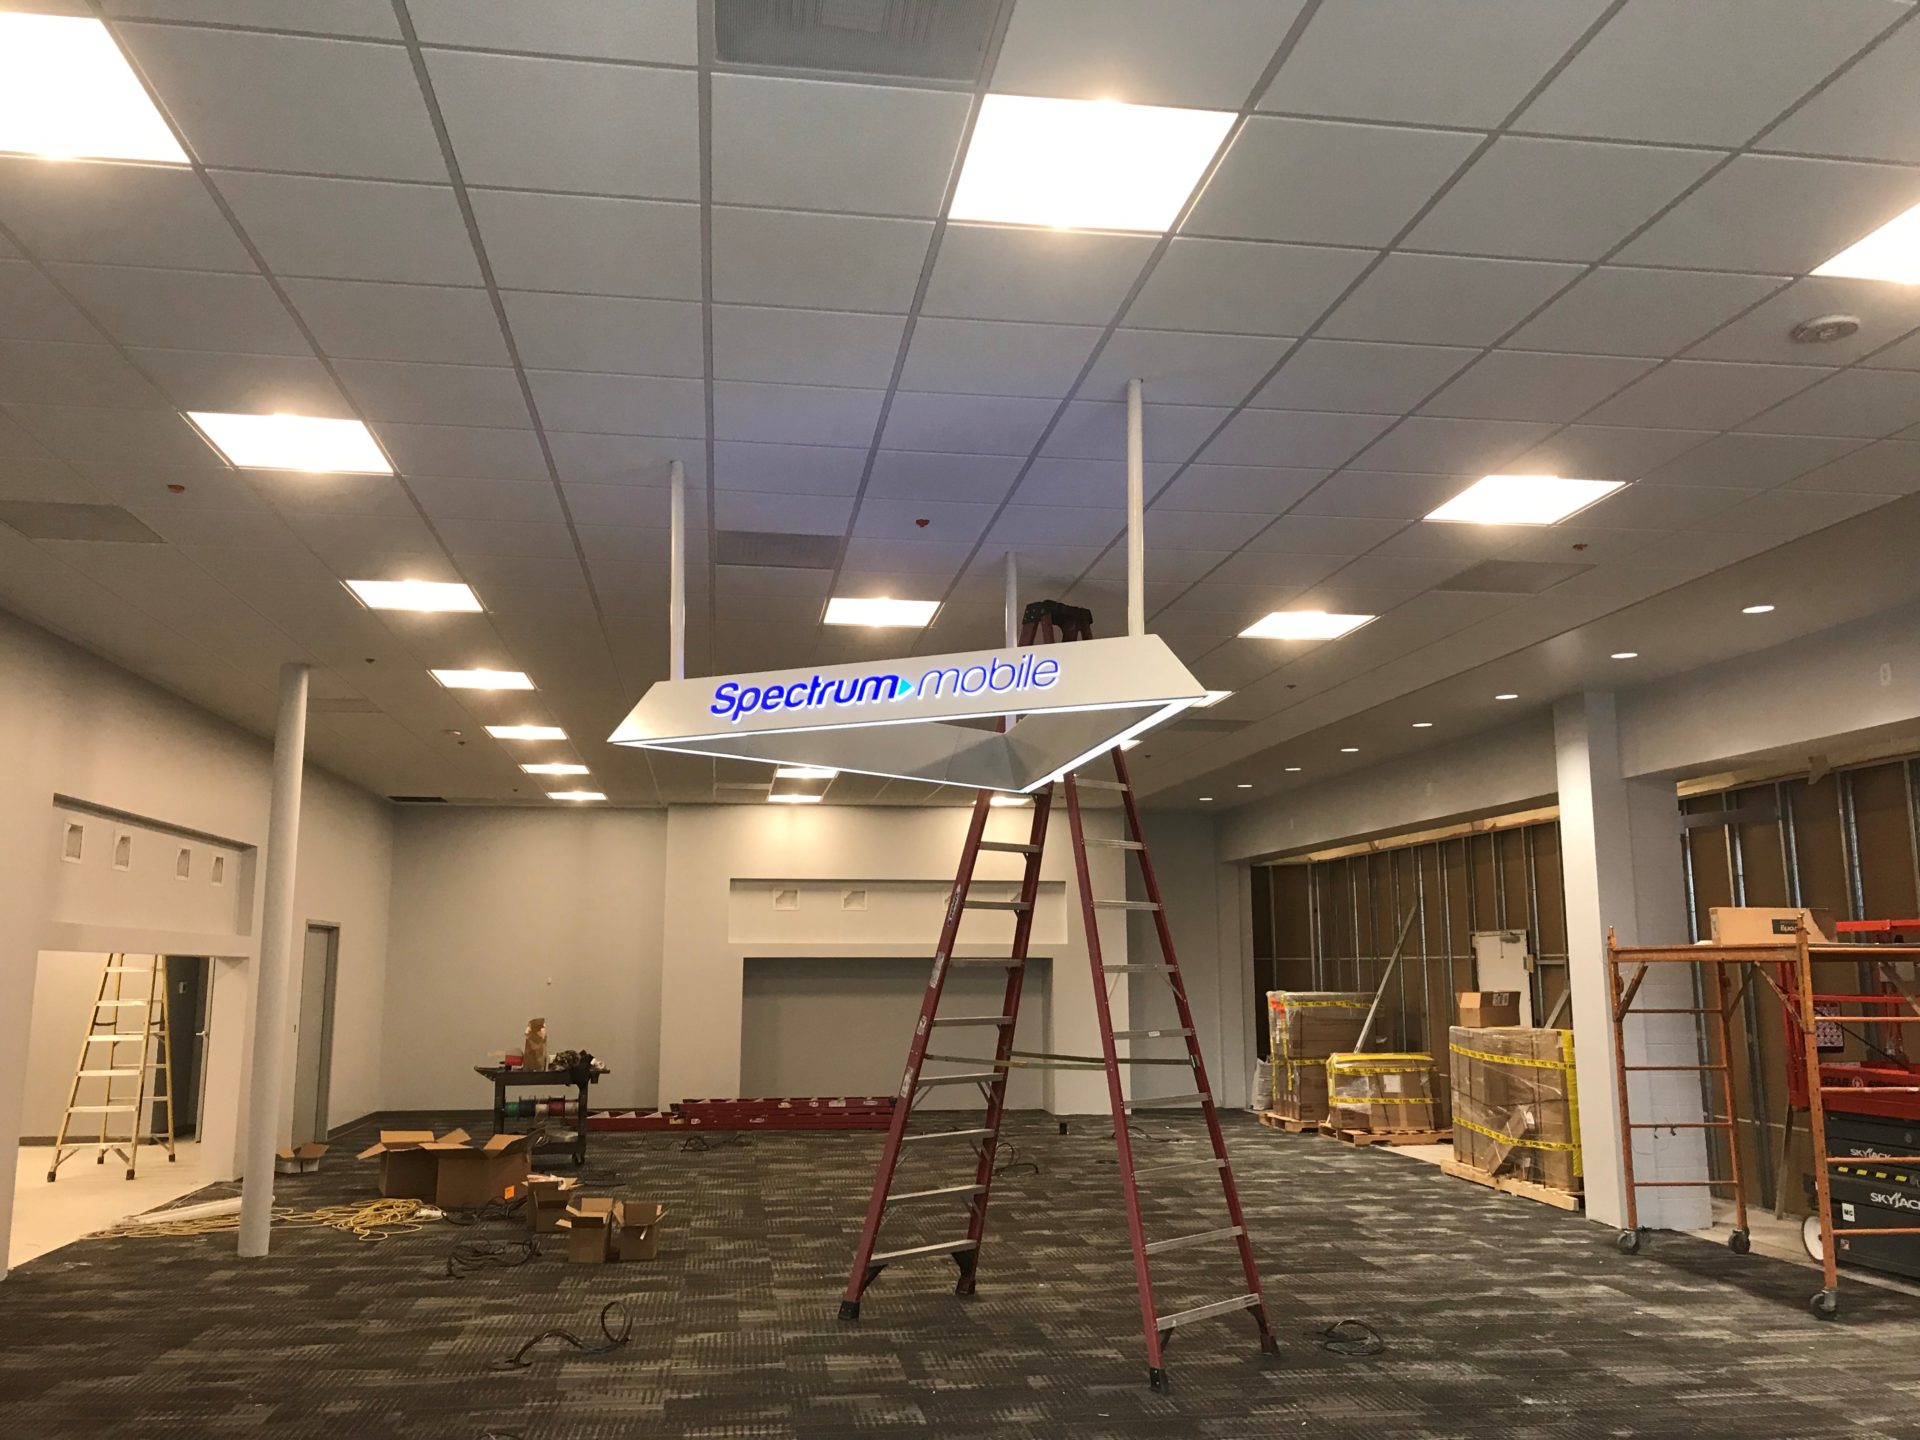 Spectrum hanging sign and lights install